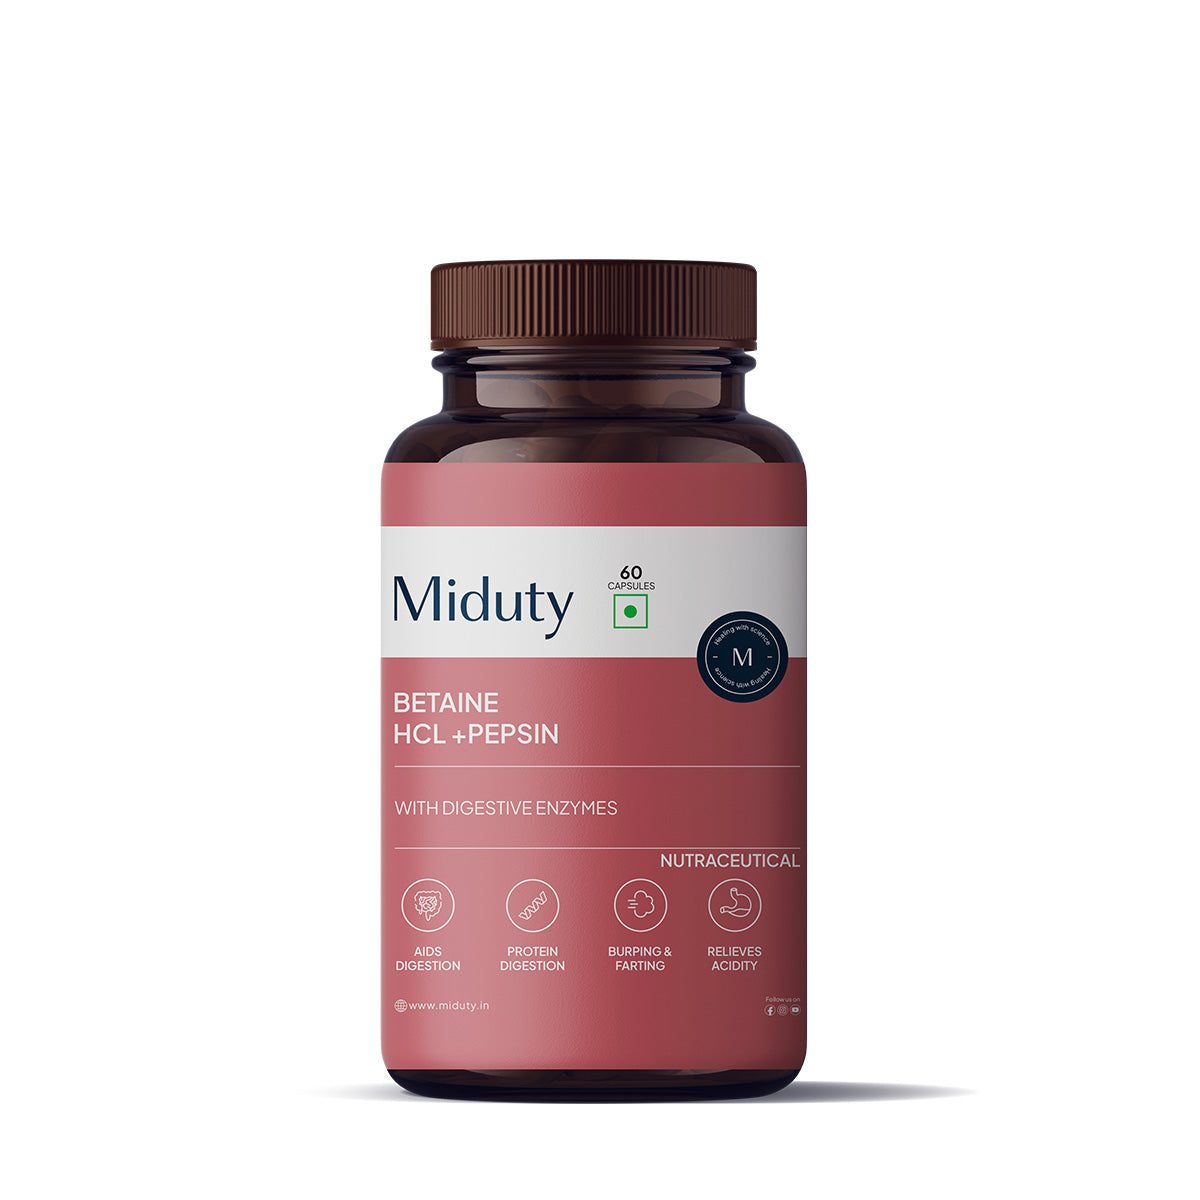 Betaine HCL+ Pepsin - Miduty